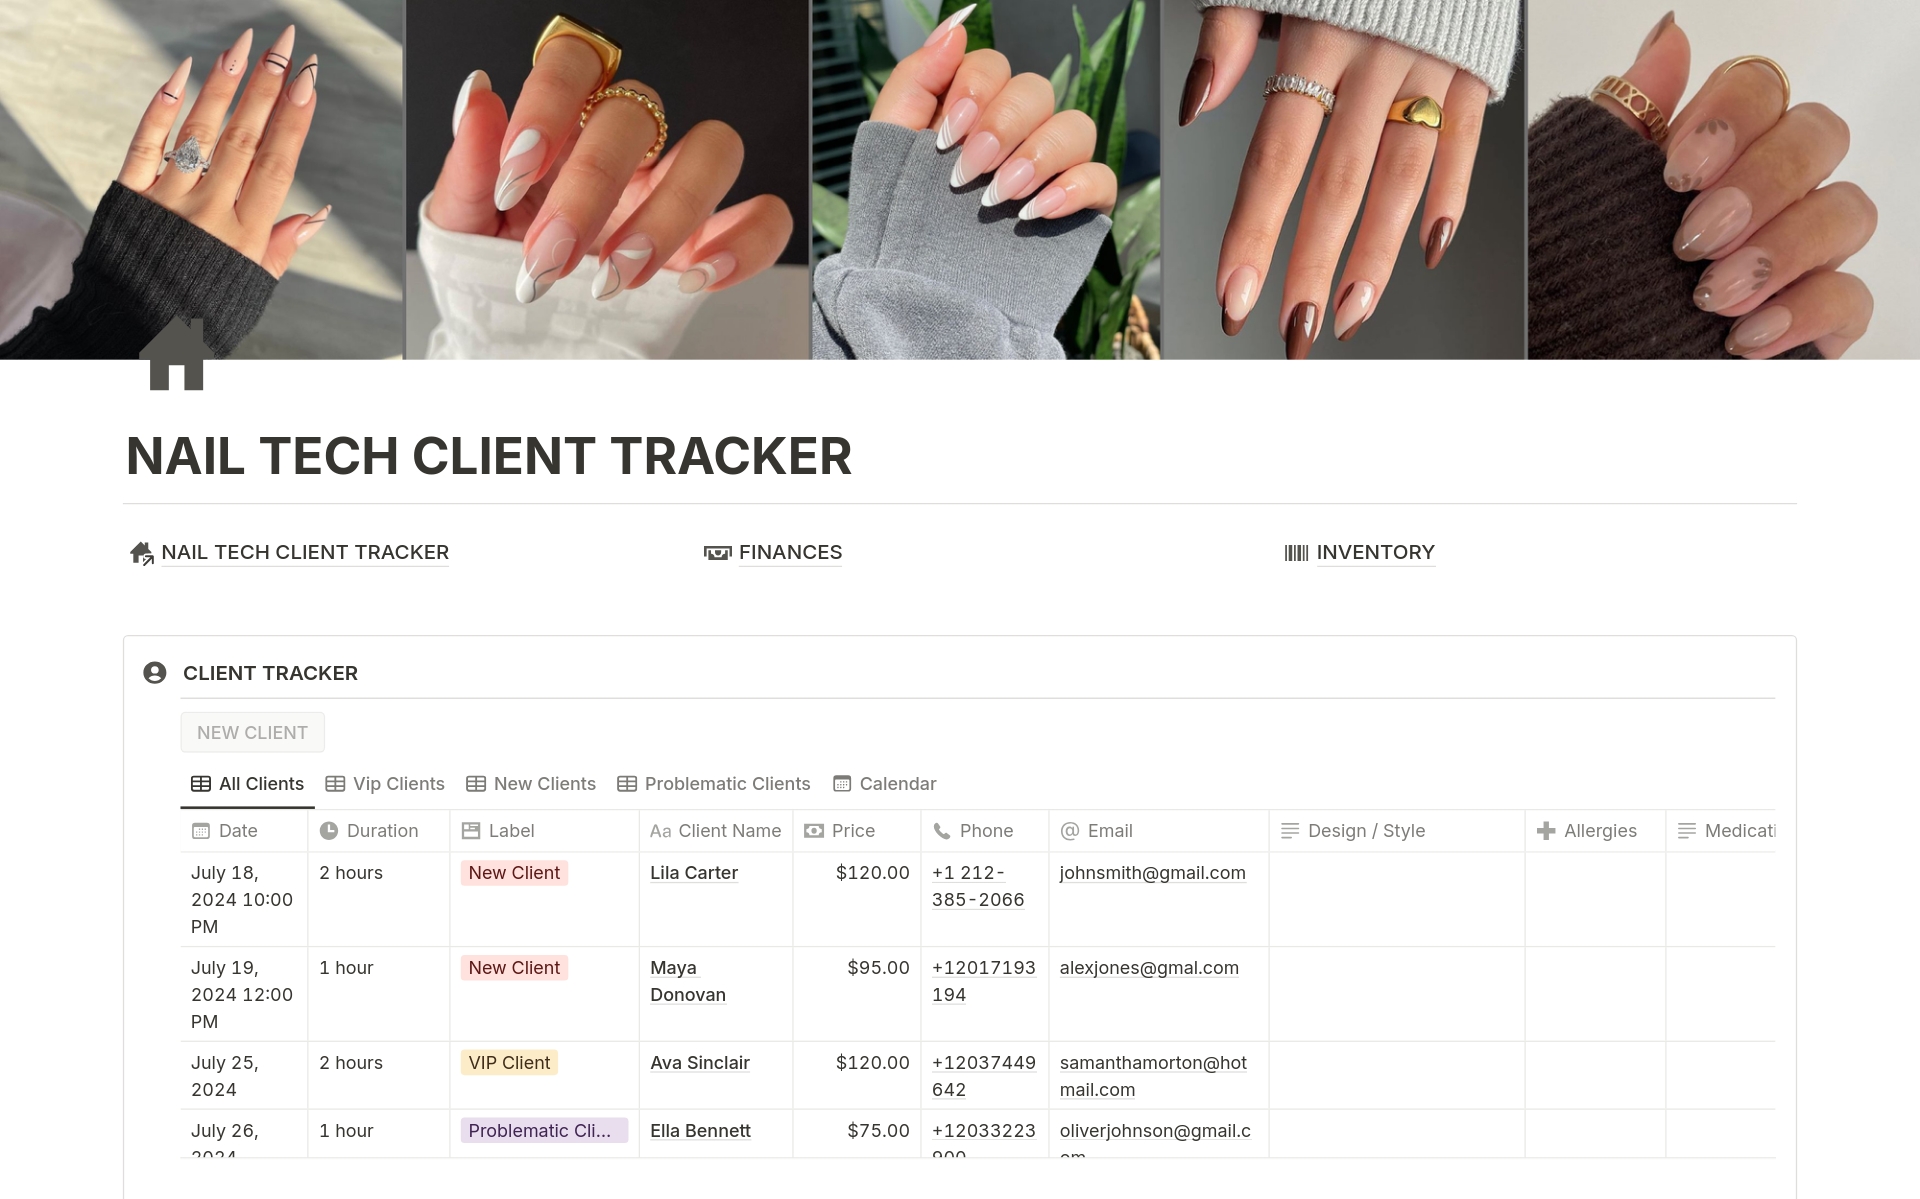 MAIN FEATURES

🖤 Client Tracker

🖤 Finances

🖤 Inventory
